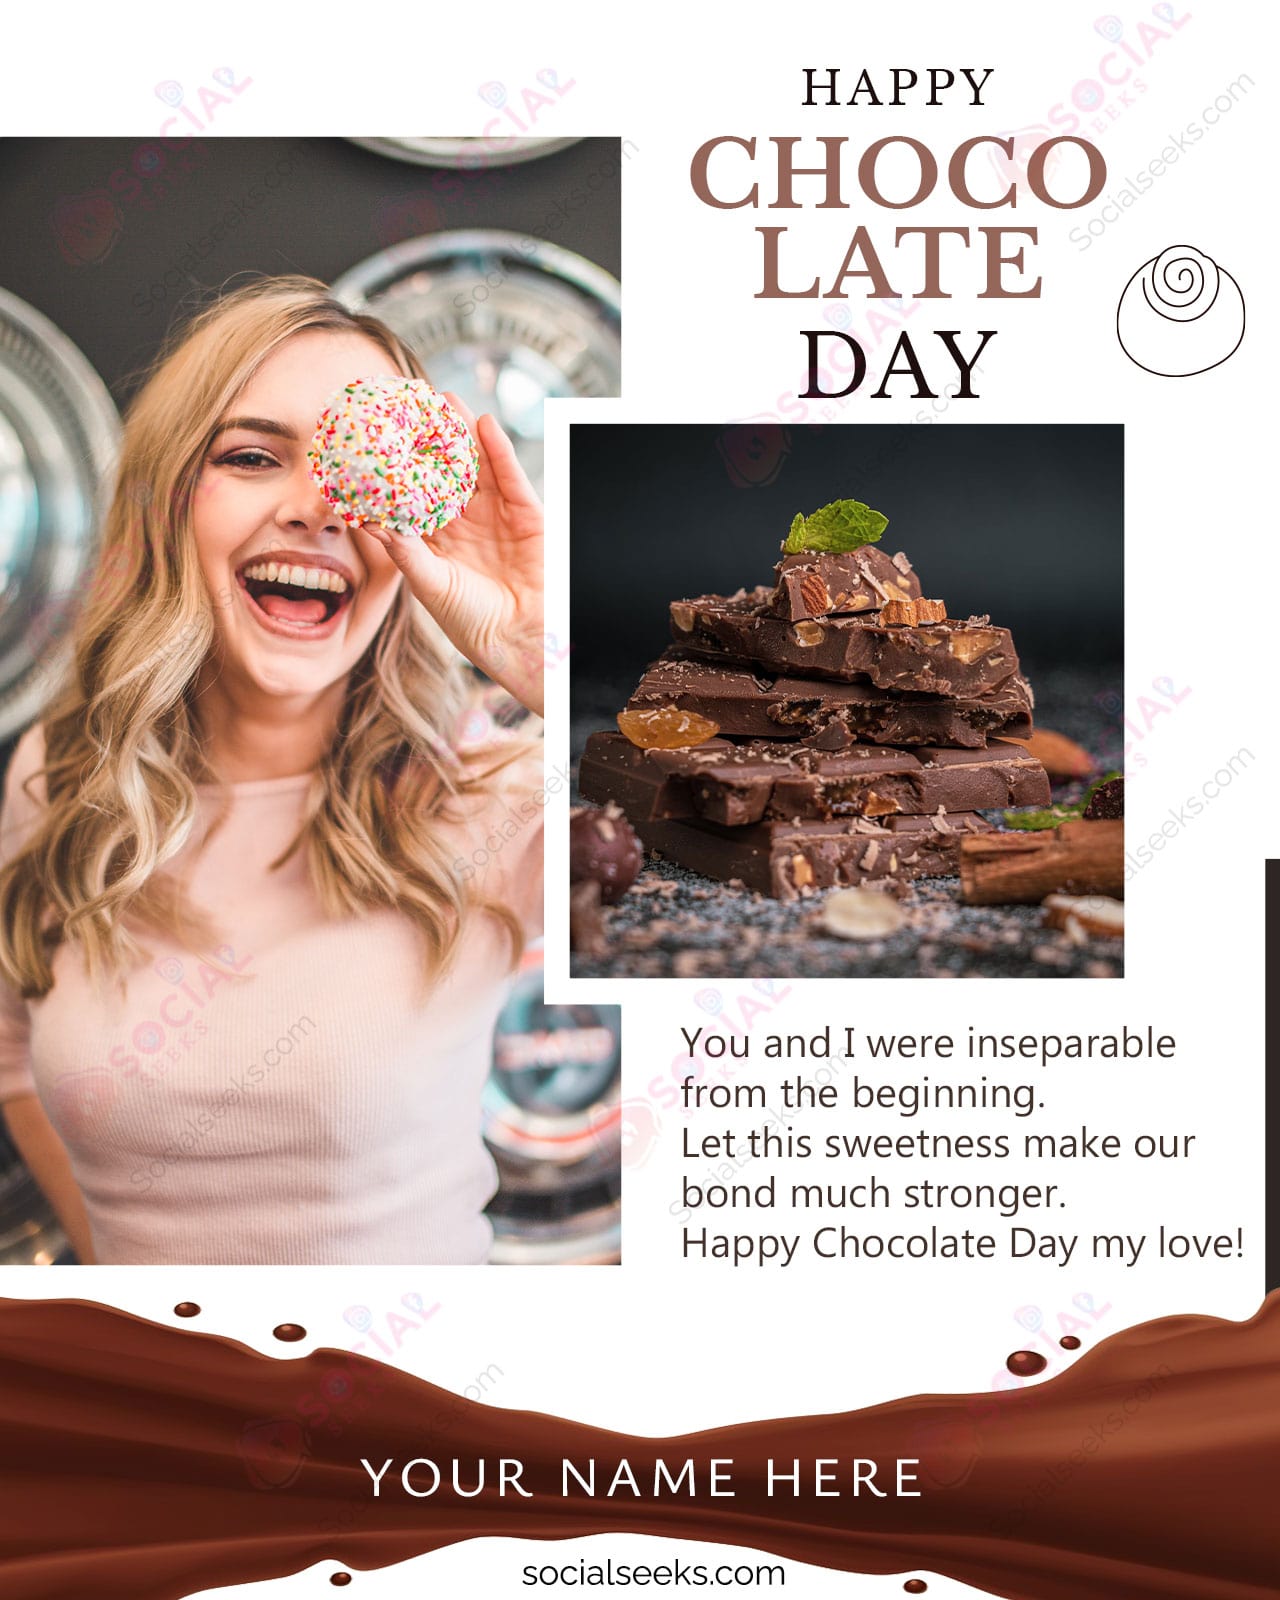 Customized Happy Chocolate Day Greeting Cards With Photo and Name